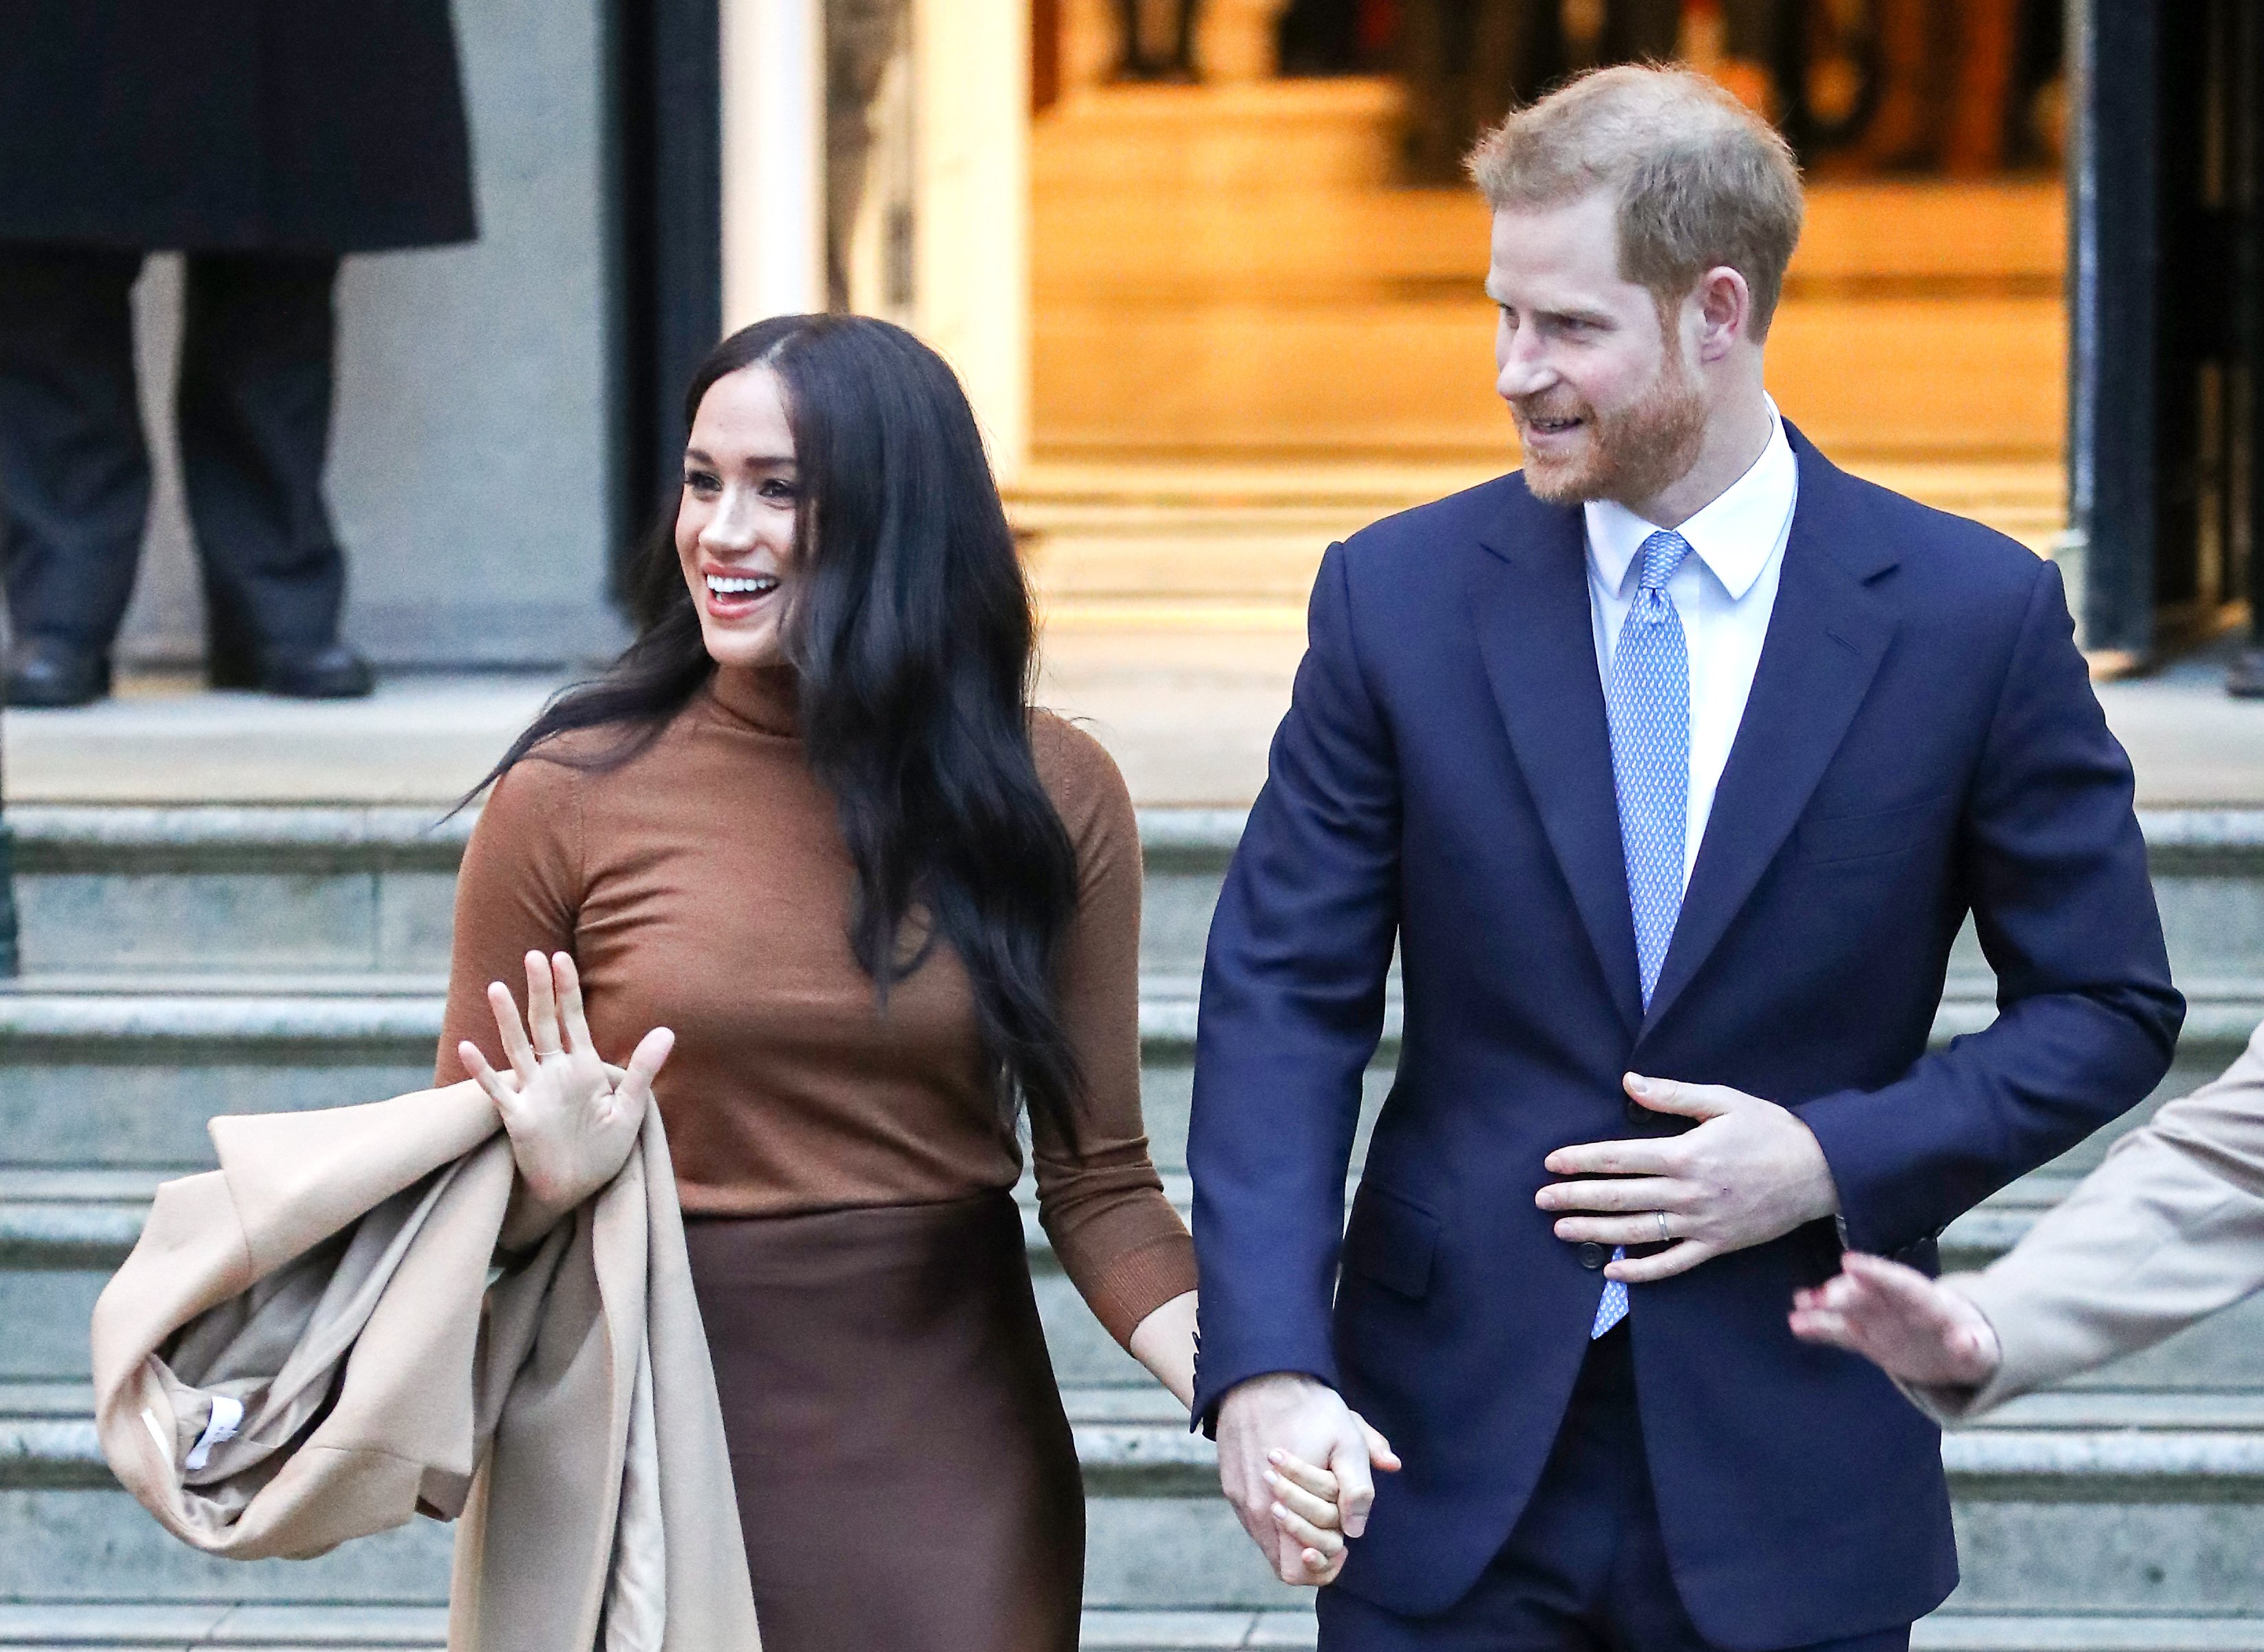 Meghan Markle and Prince Harry leave the Canada House in London, England on January 7, 2020. | Photo: Getty Images